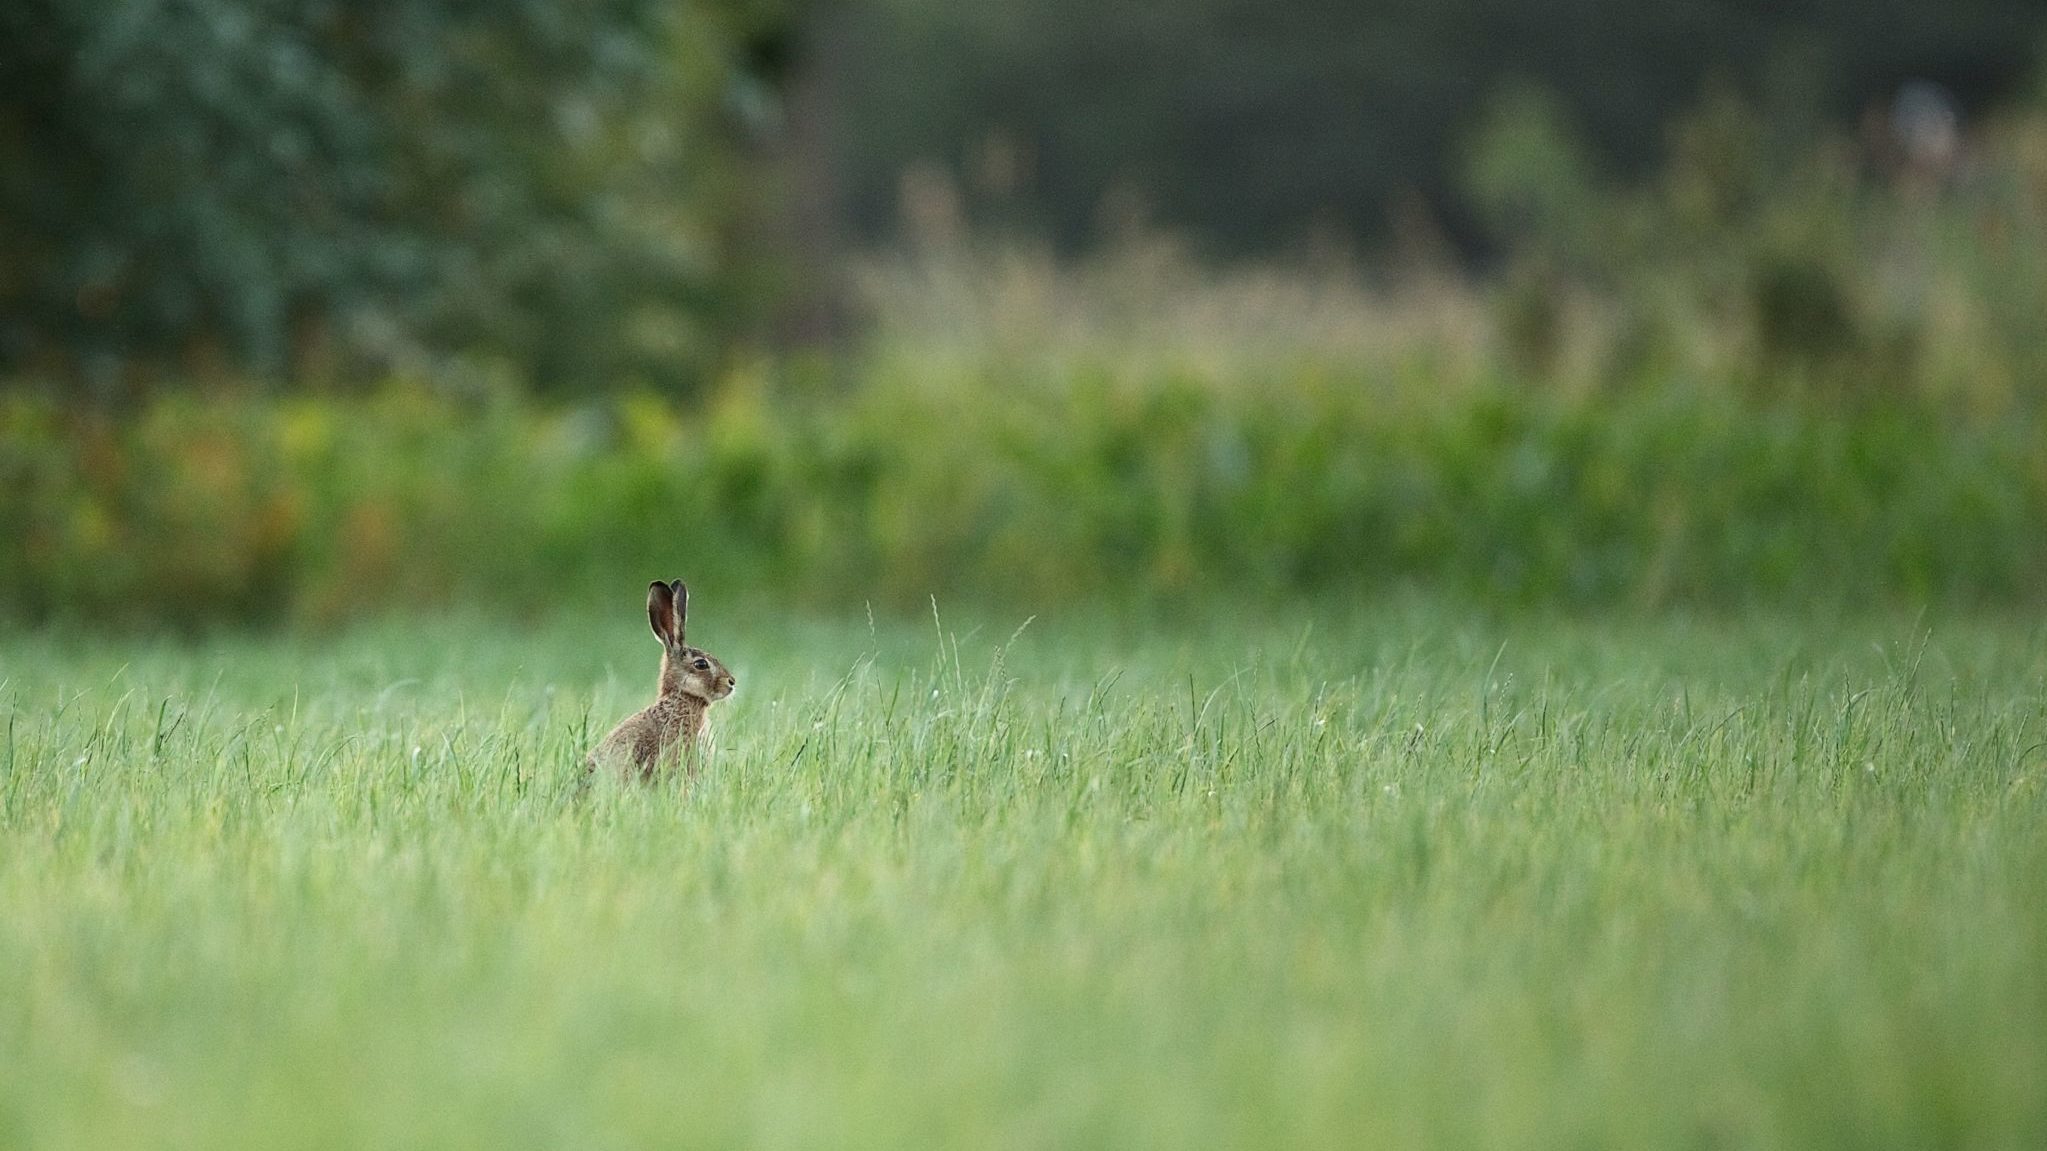 A hare in a tall grass field